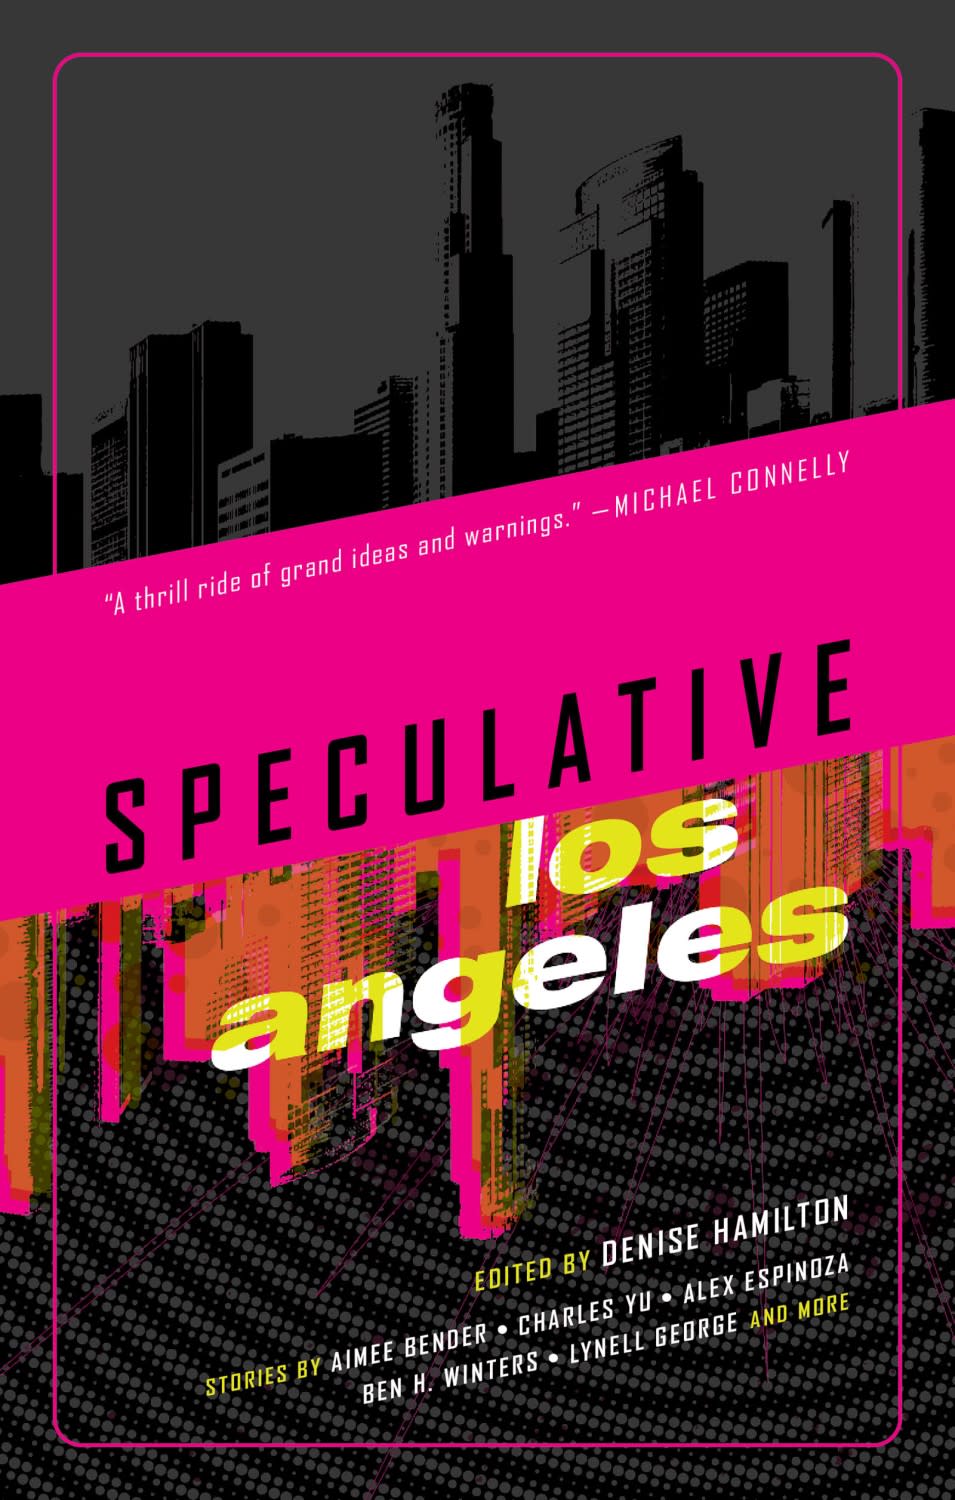 The cover of "Speculative Los Angeles."